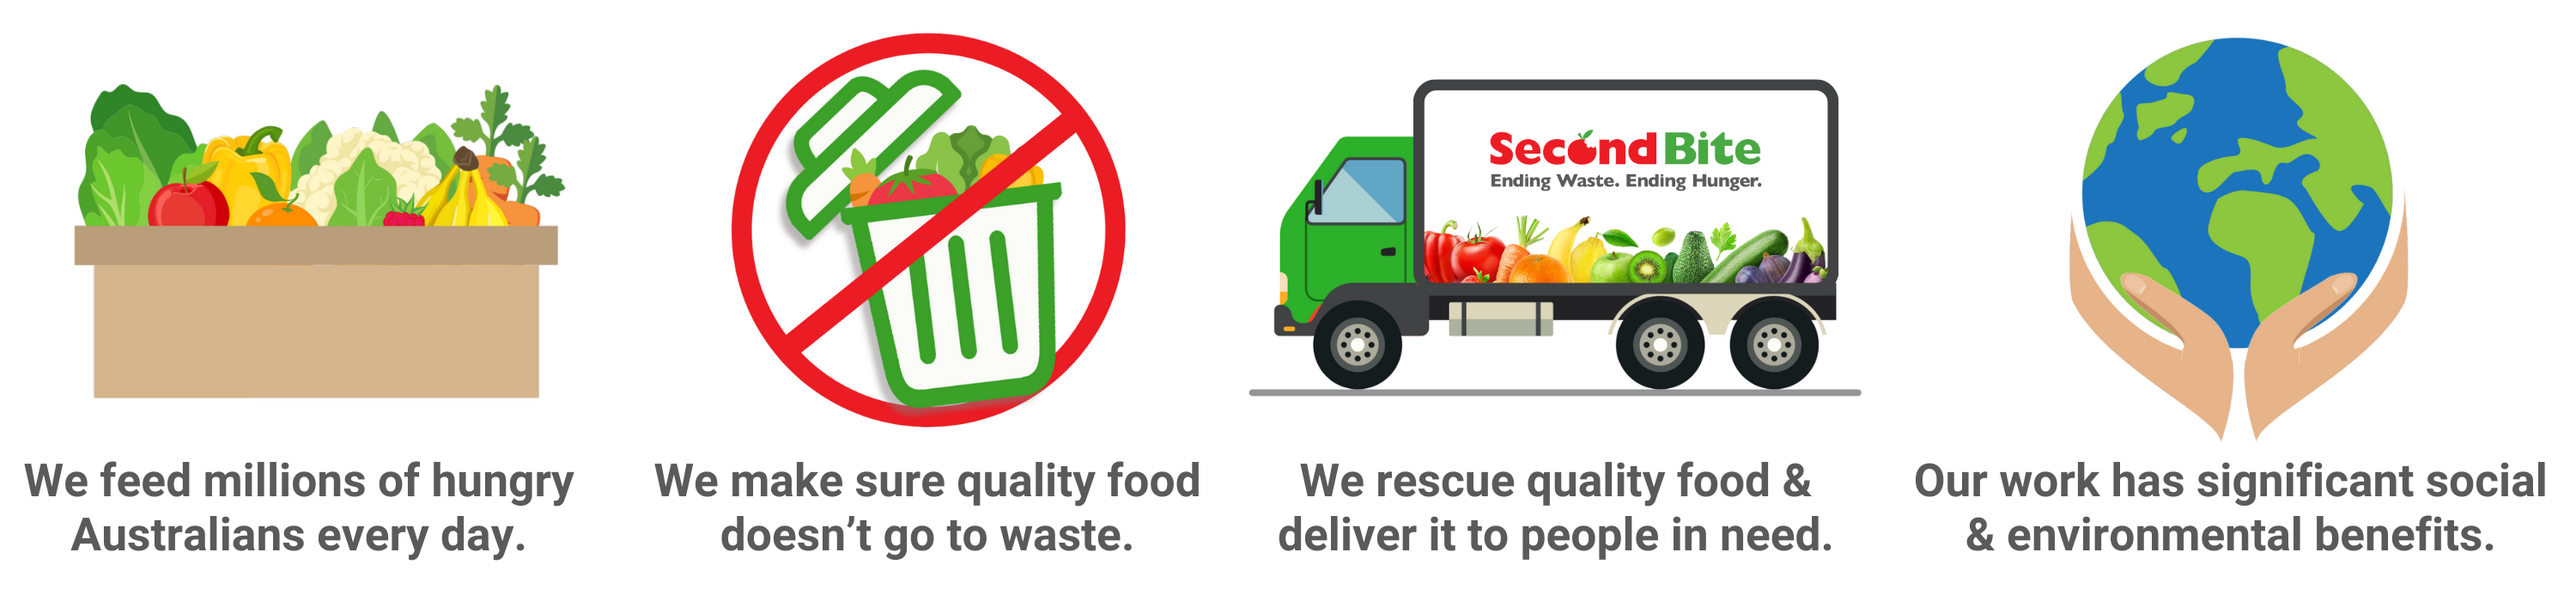 SecondBite Food Rescue Organisation Charity Vision and Purpose